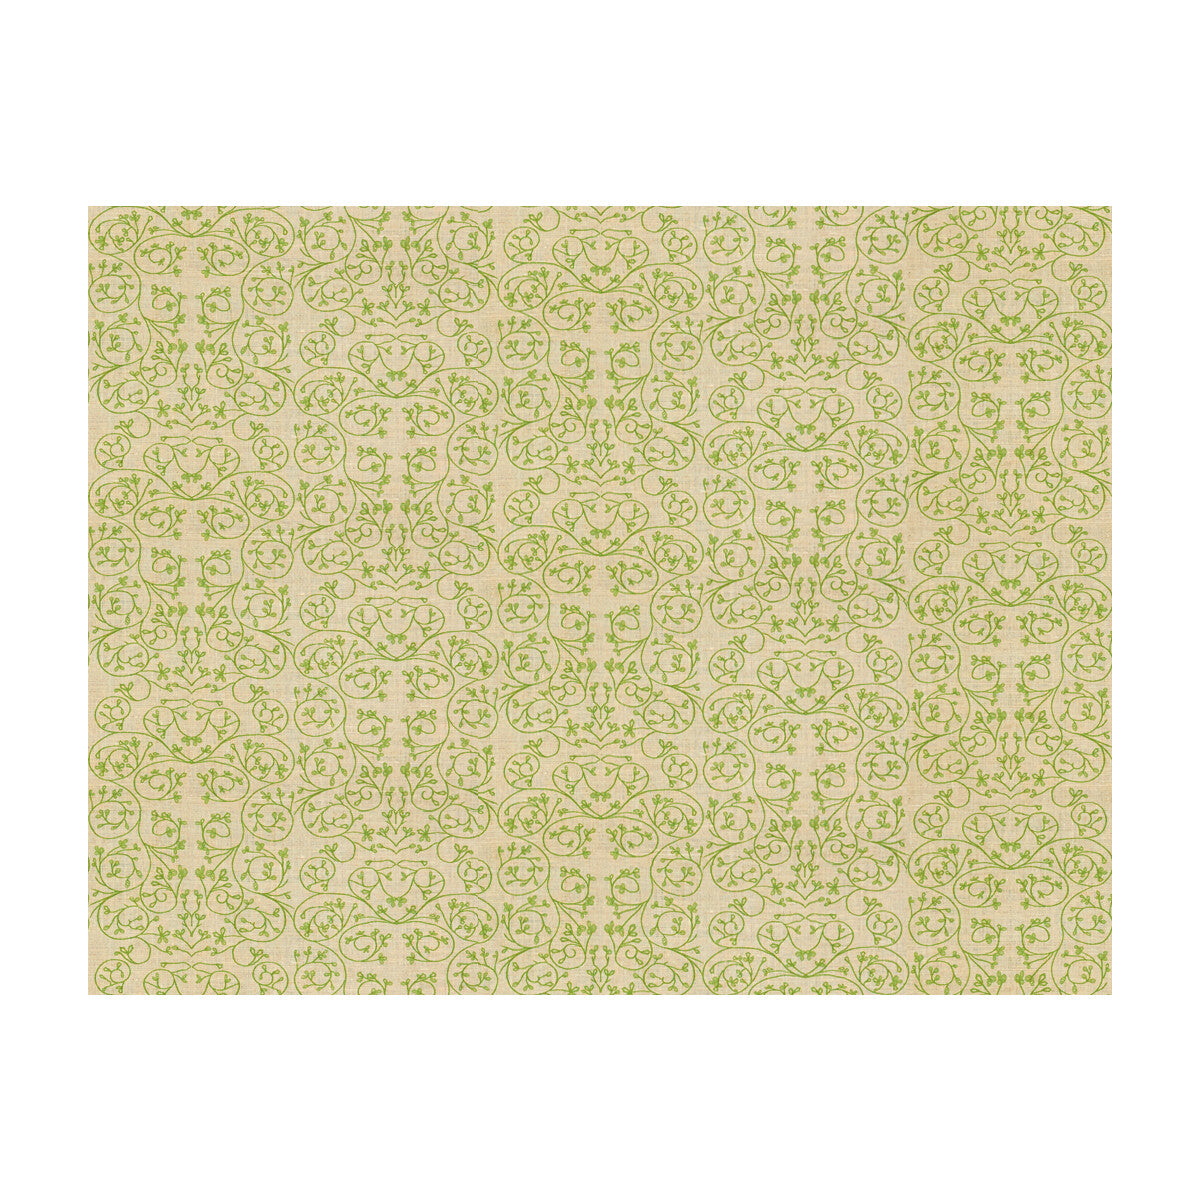 Garden fabric in meadow color - pattern GWF-3511.3.0 - by Lee Jofa Modern in the Allegra Hicks Garden collection